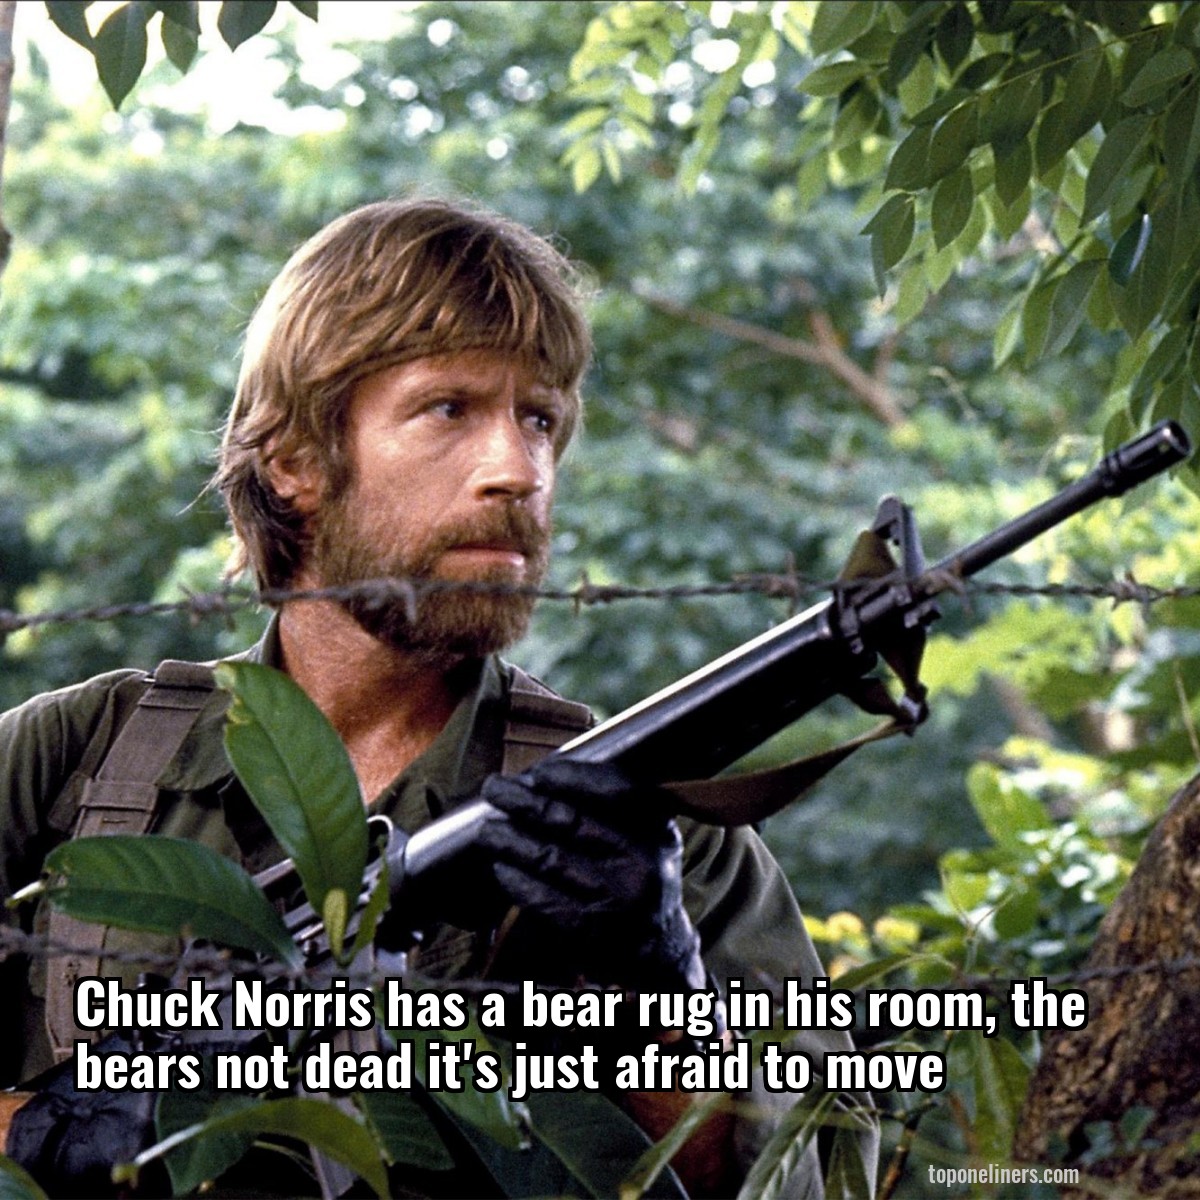 Chuck Norris has a bear rug in his room, the bears not dead it's just afraid to move